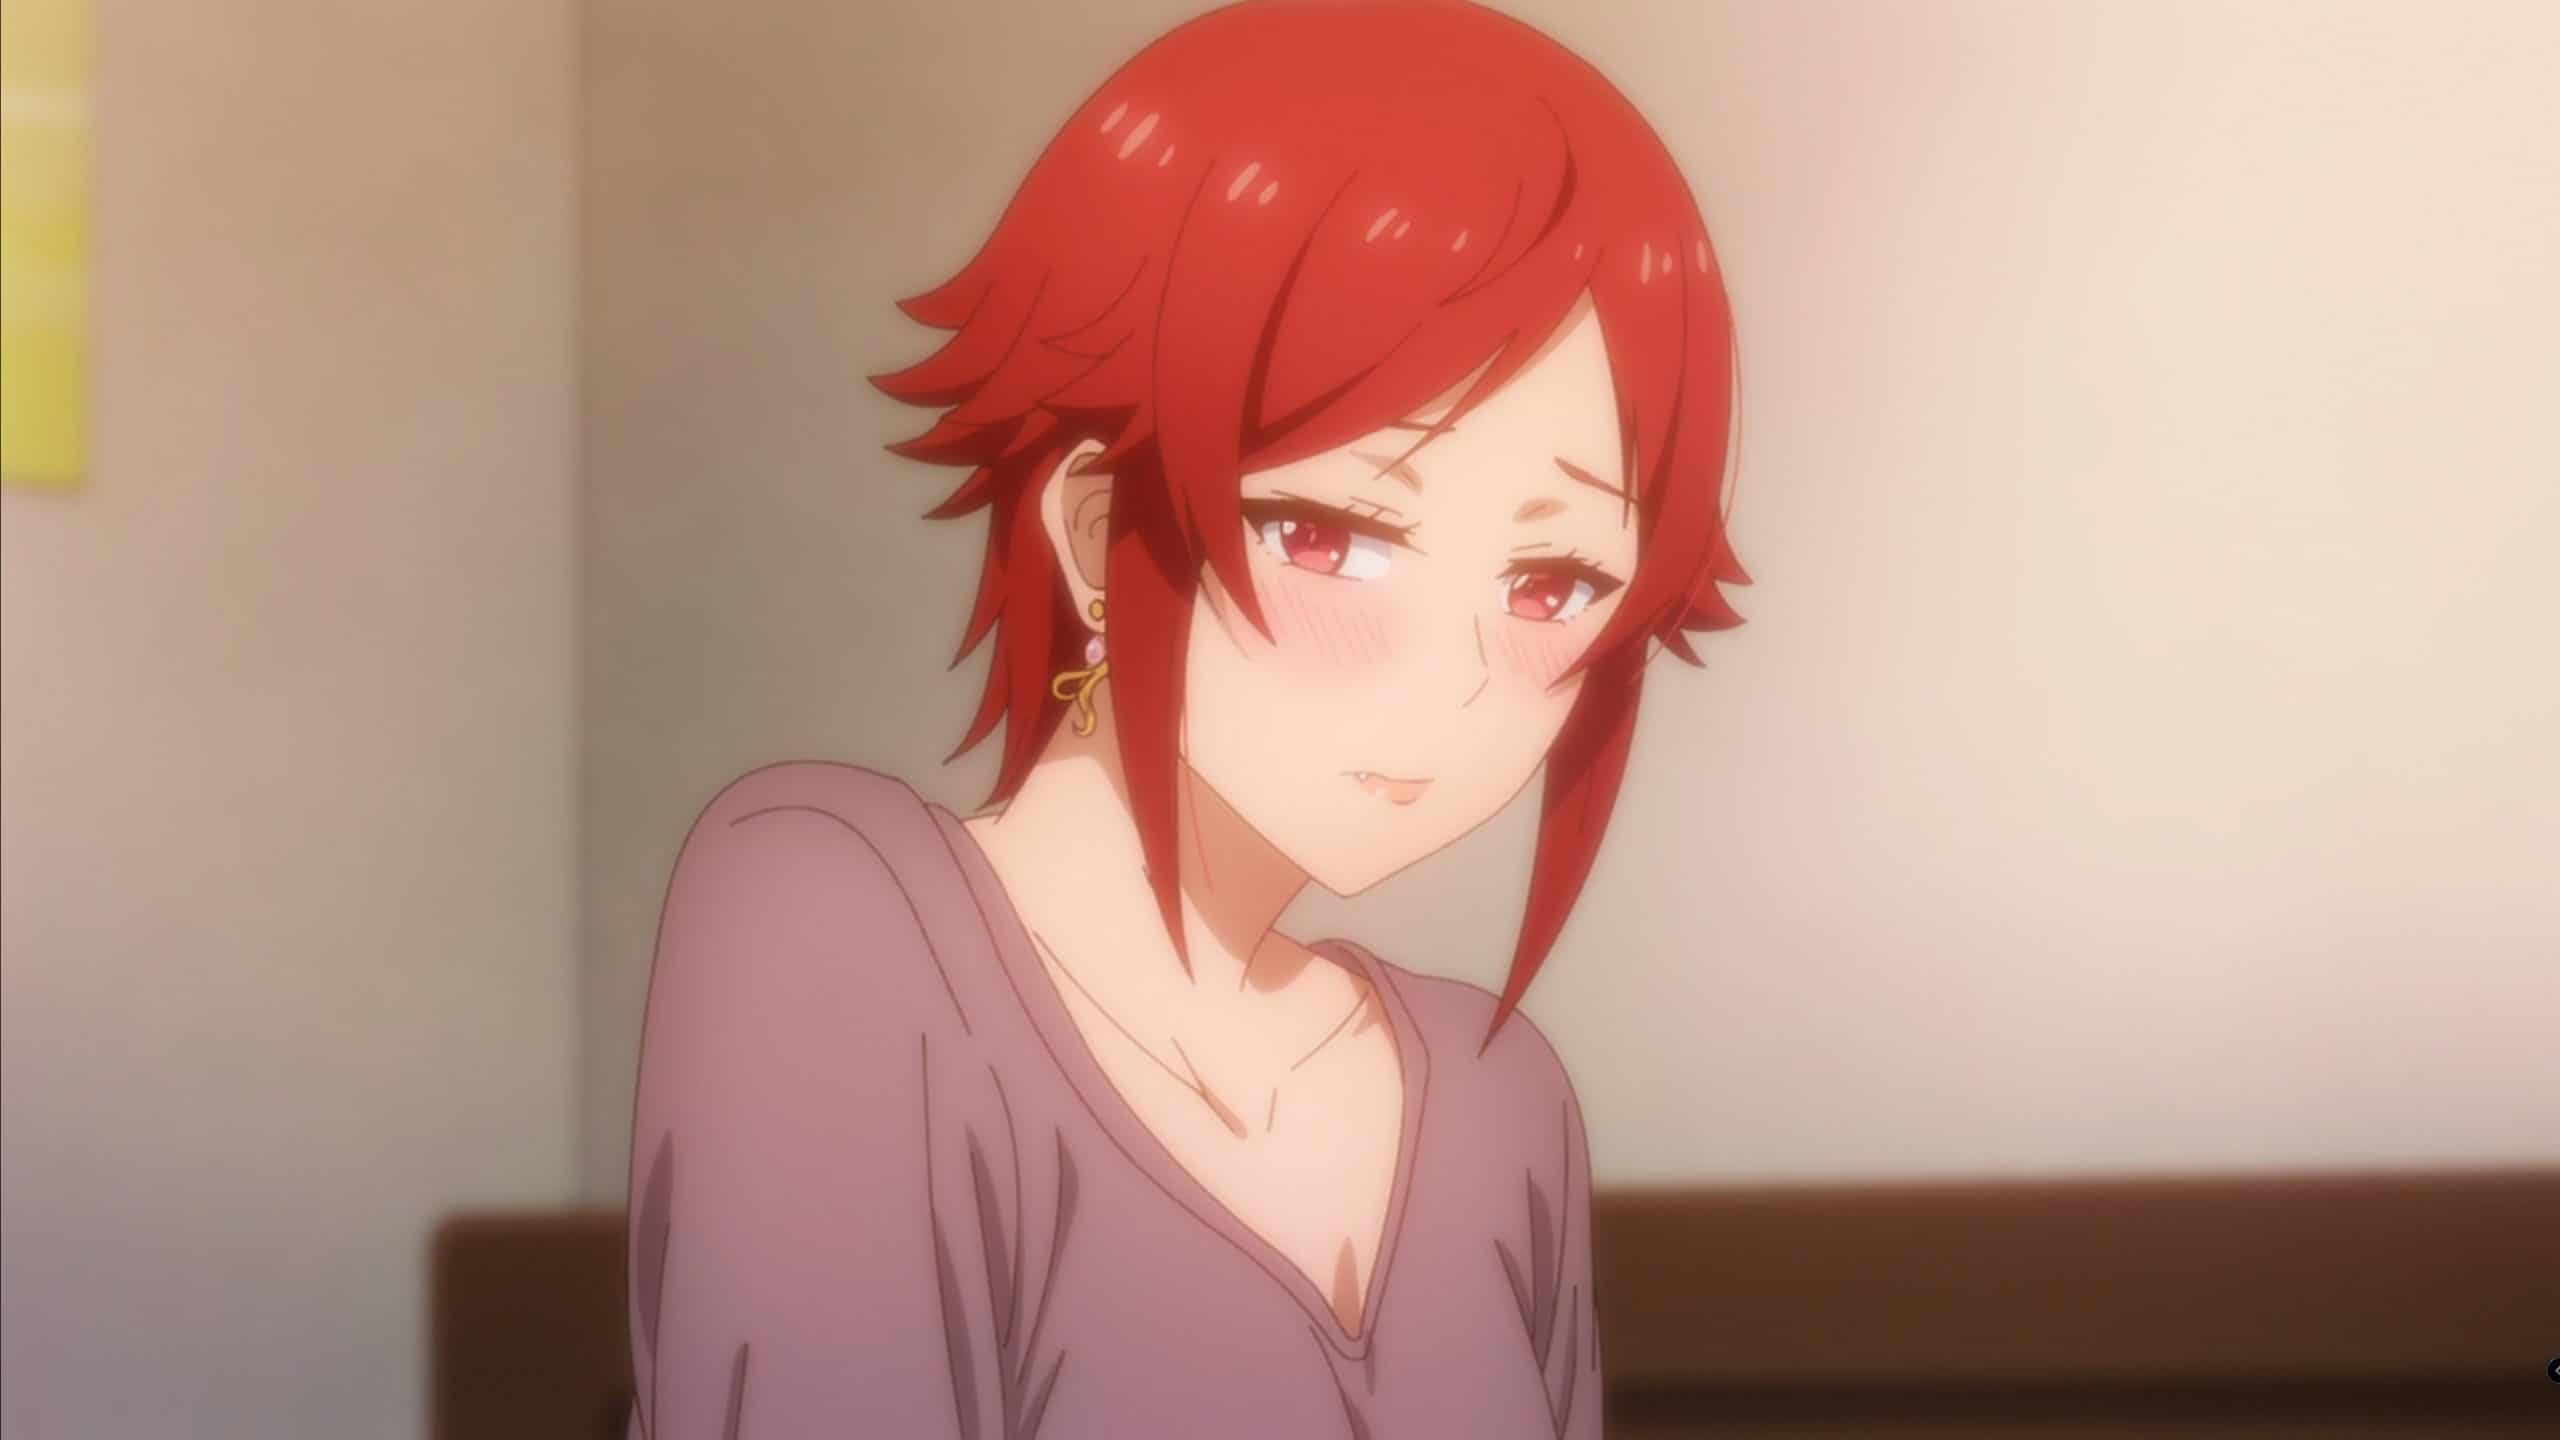 Tomo-chan is a Girl! episode 13 marks the end of the series as